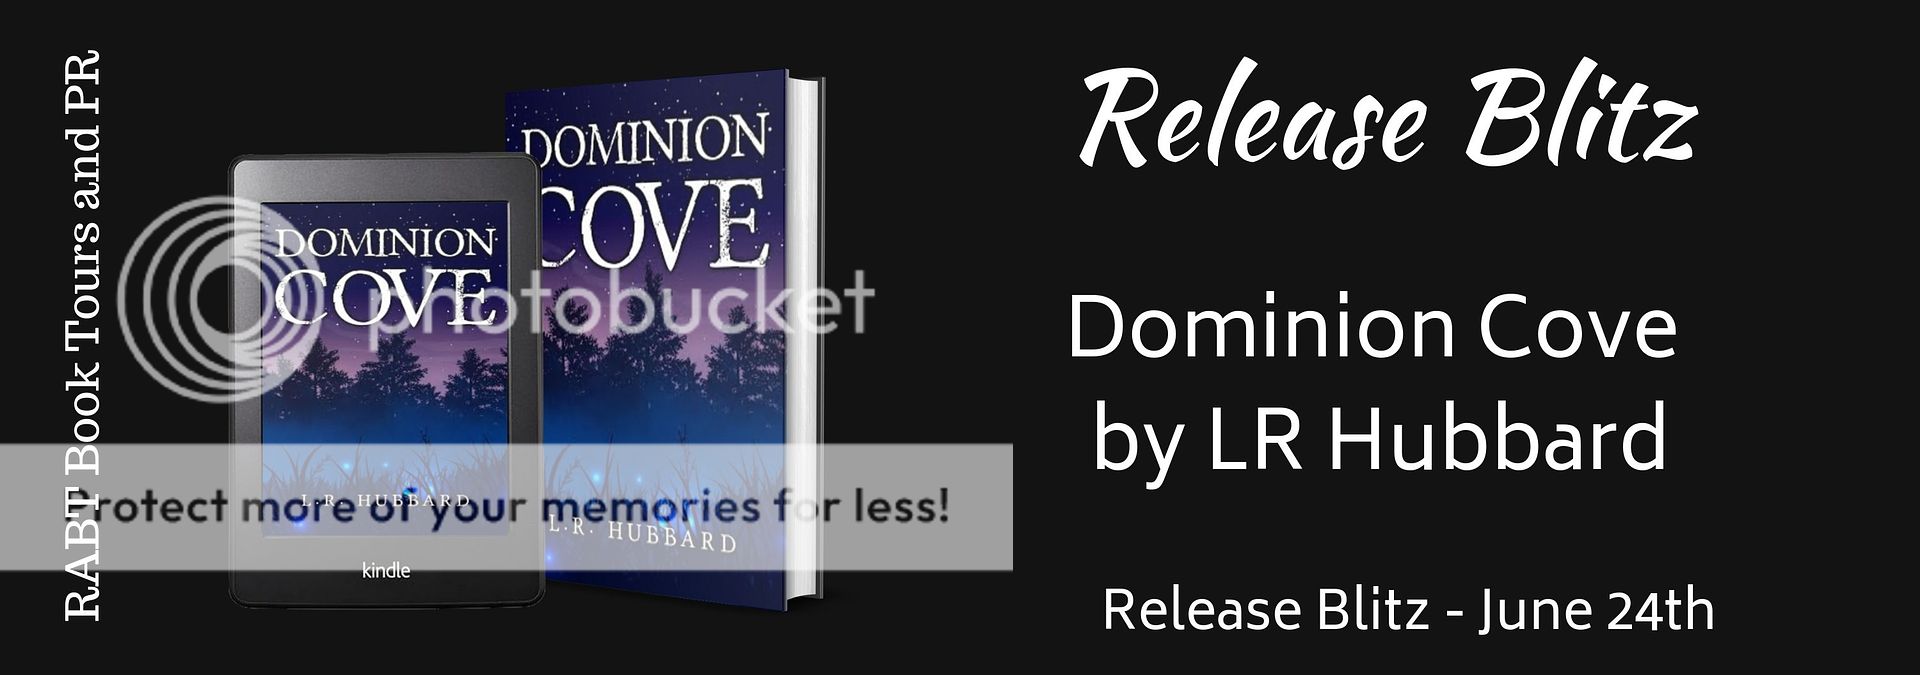 New Release Blitz: Dominion Cove by LR Hubbard #fantasy #promo #newbookalert #availablenow @LR_Hubbard @RABTBookTours